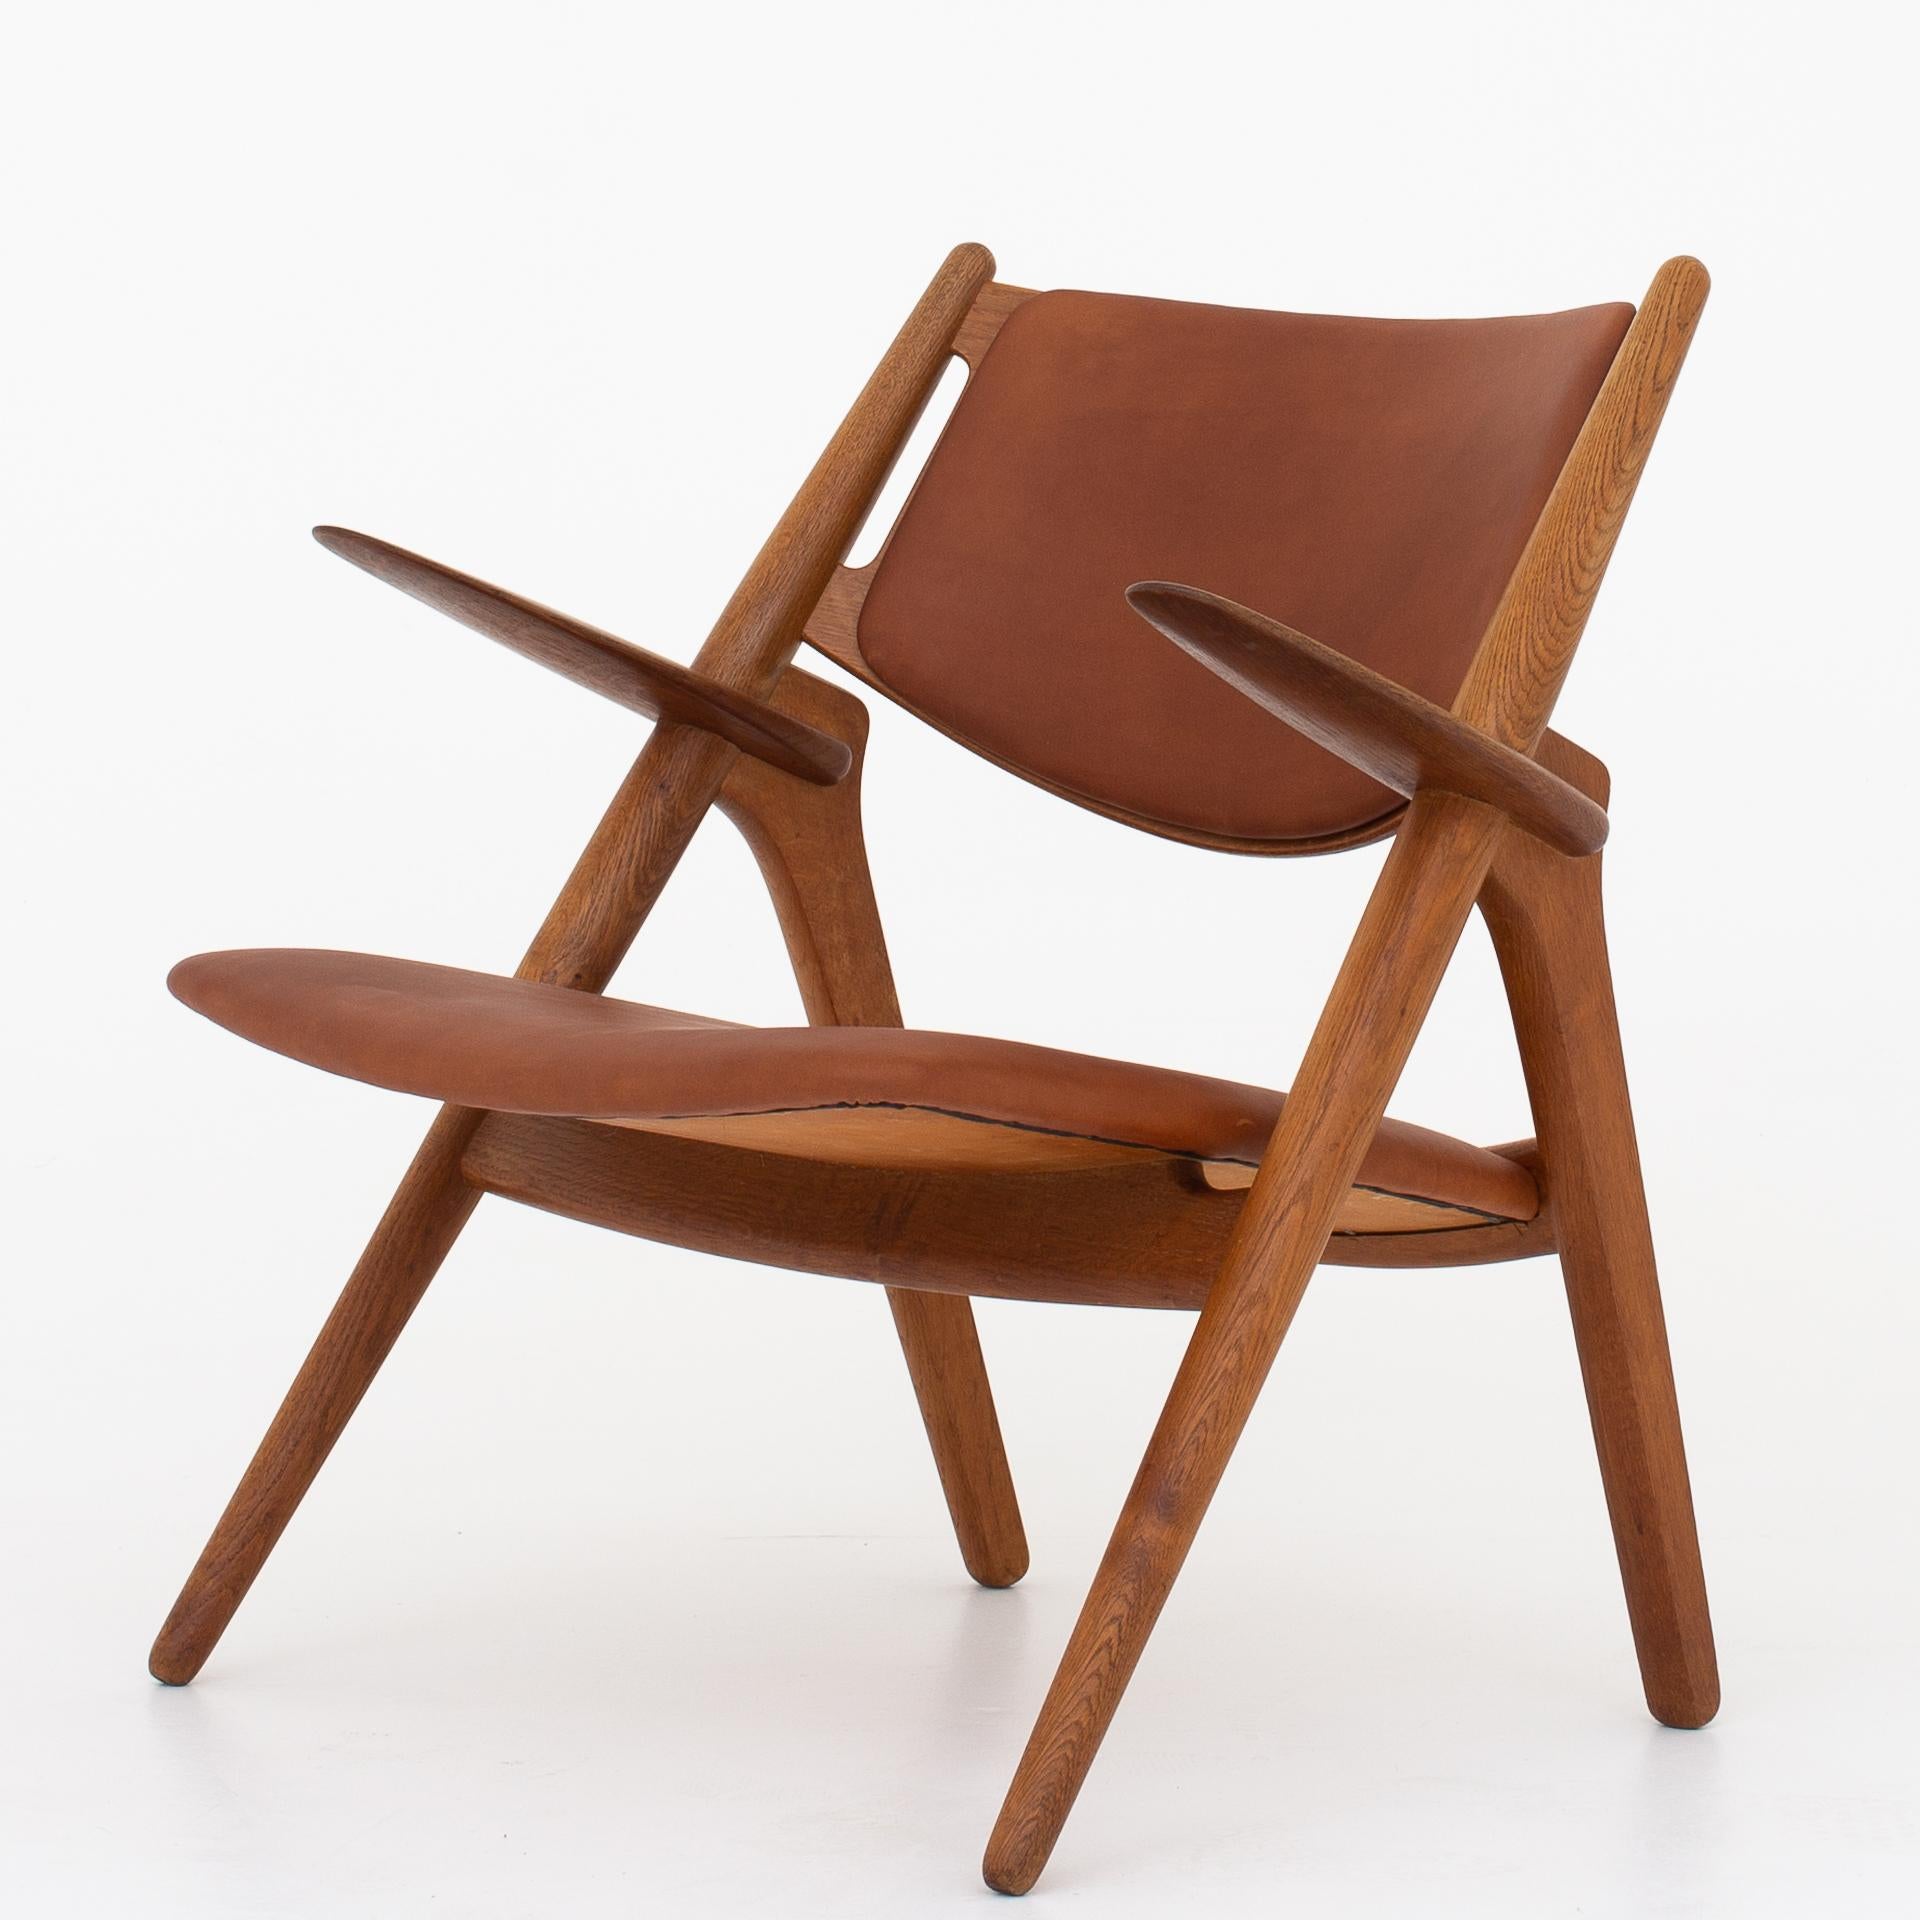 Two CH 28 - 'Sawbuck' easy chairs in patinated oak, reupholstered in Dunes Cognac leather. The leather has been treated with leather grease. Maker Carl Hansen.